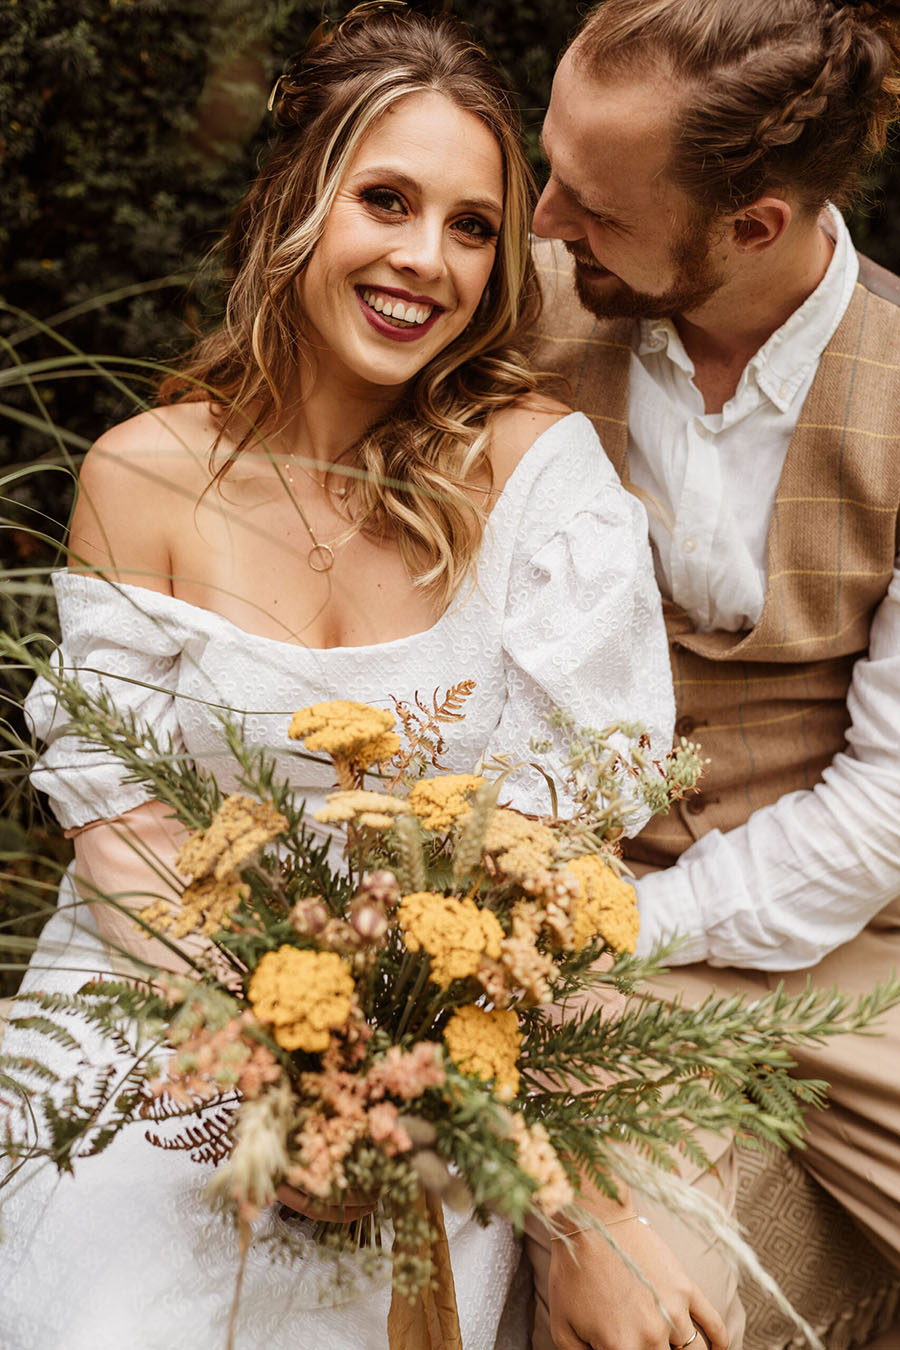 A couple pose for the camera. She's blonde, smiling and wearing an off-the-shoulder dress. He's looking at her. She holds a bouquet of wild yellow flowers. Photographer credit Sarah Hoyle, styling by Amethyst Weddings